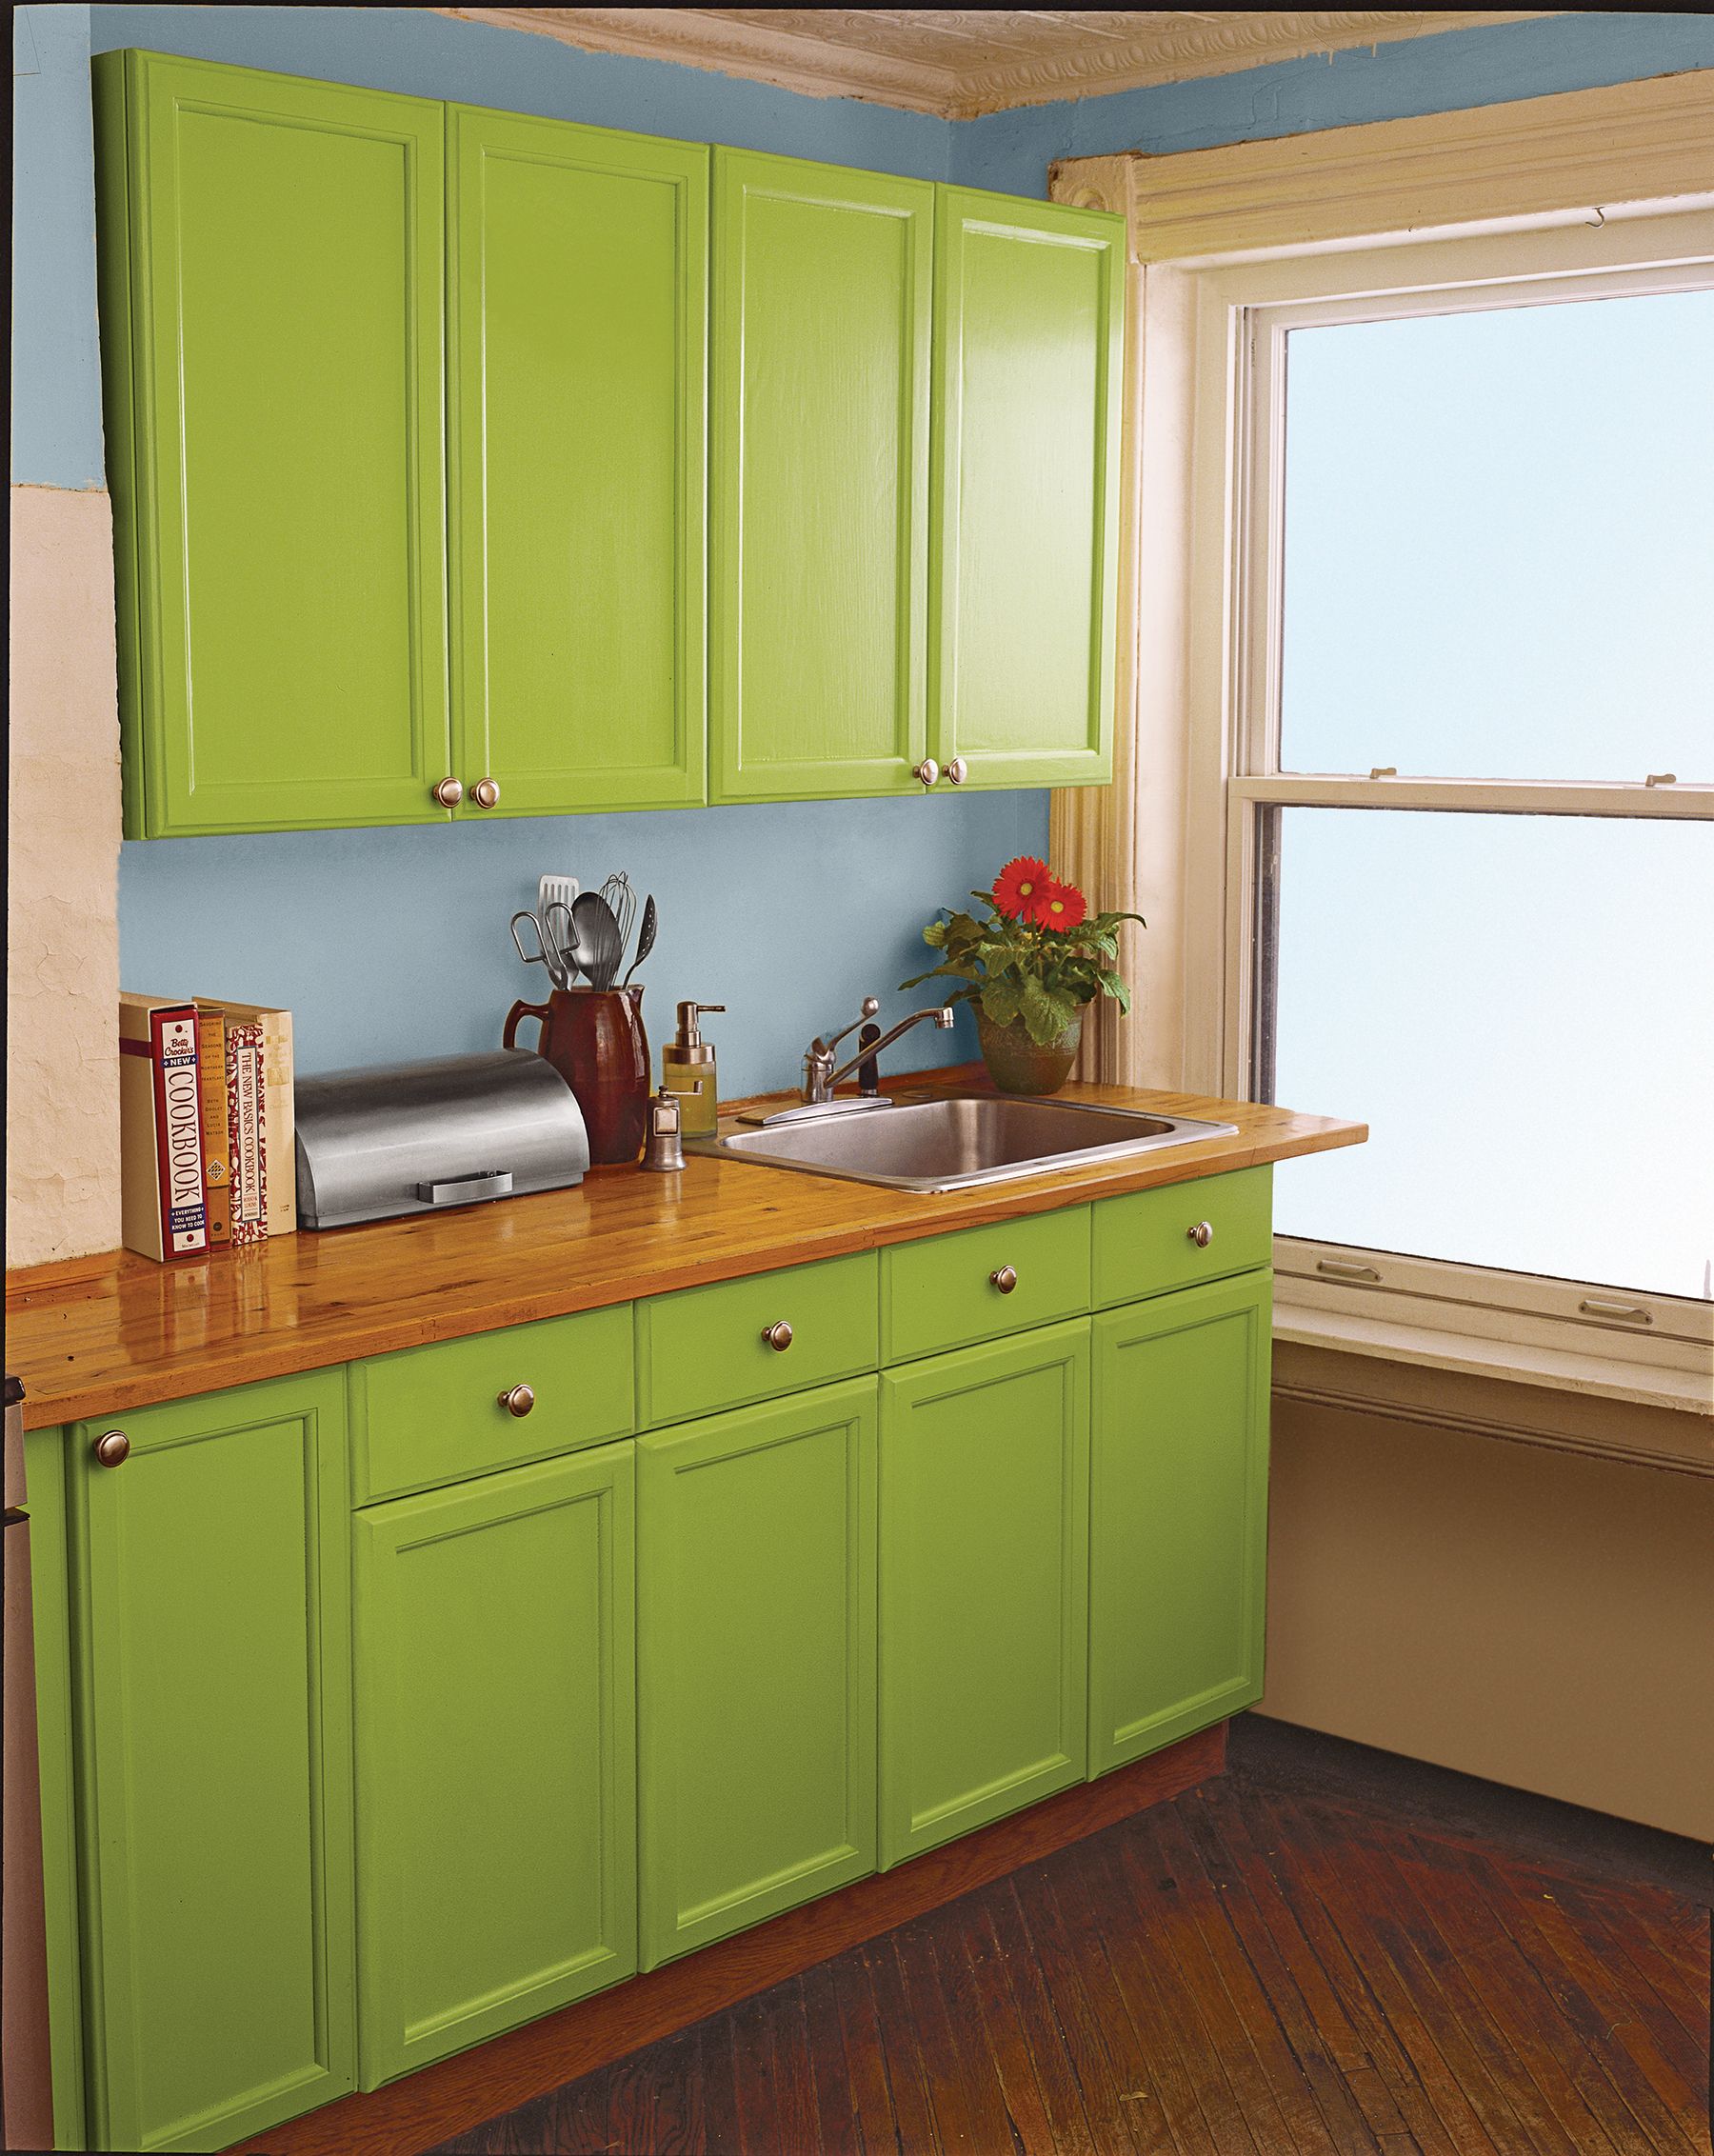 10 Ways to Redo Kitchen Cabinets Without Replacing Them - This Old House